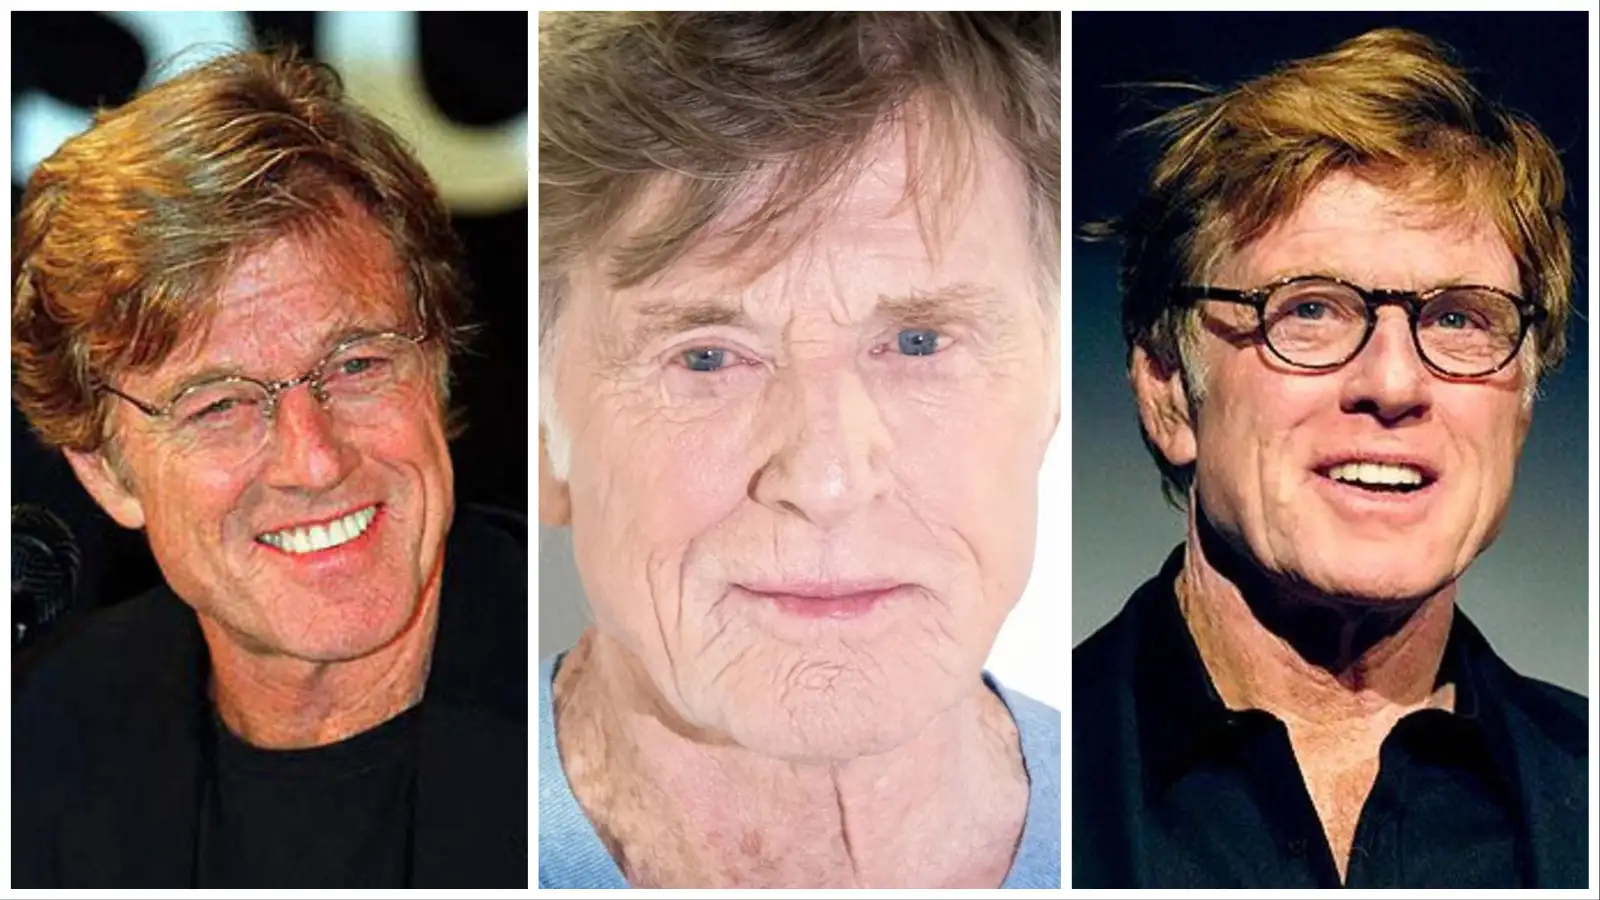 Robert-Redford-Net-Worth-2023-Annual-Income-Age-Height-Family-House-Cars-etc.